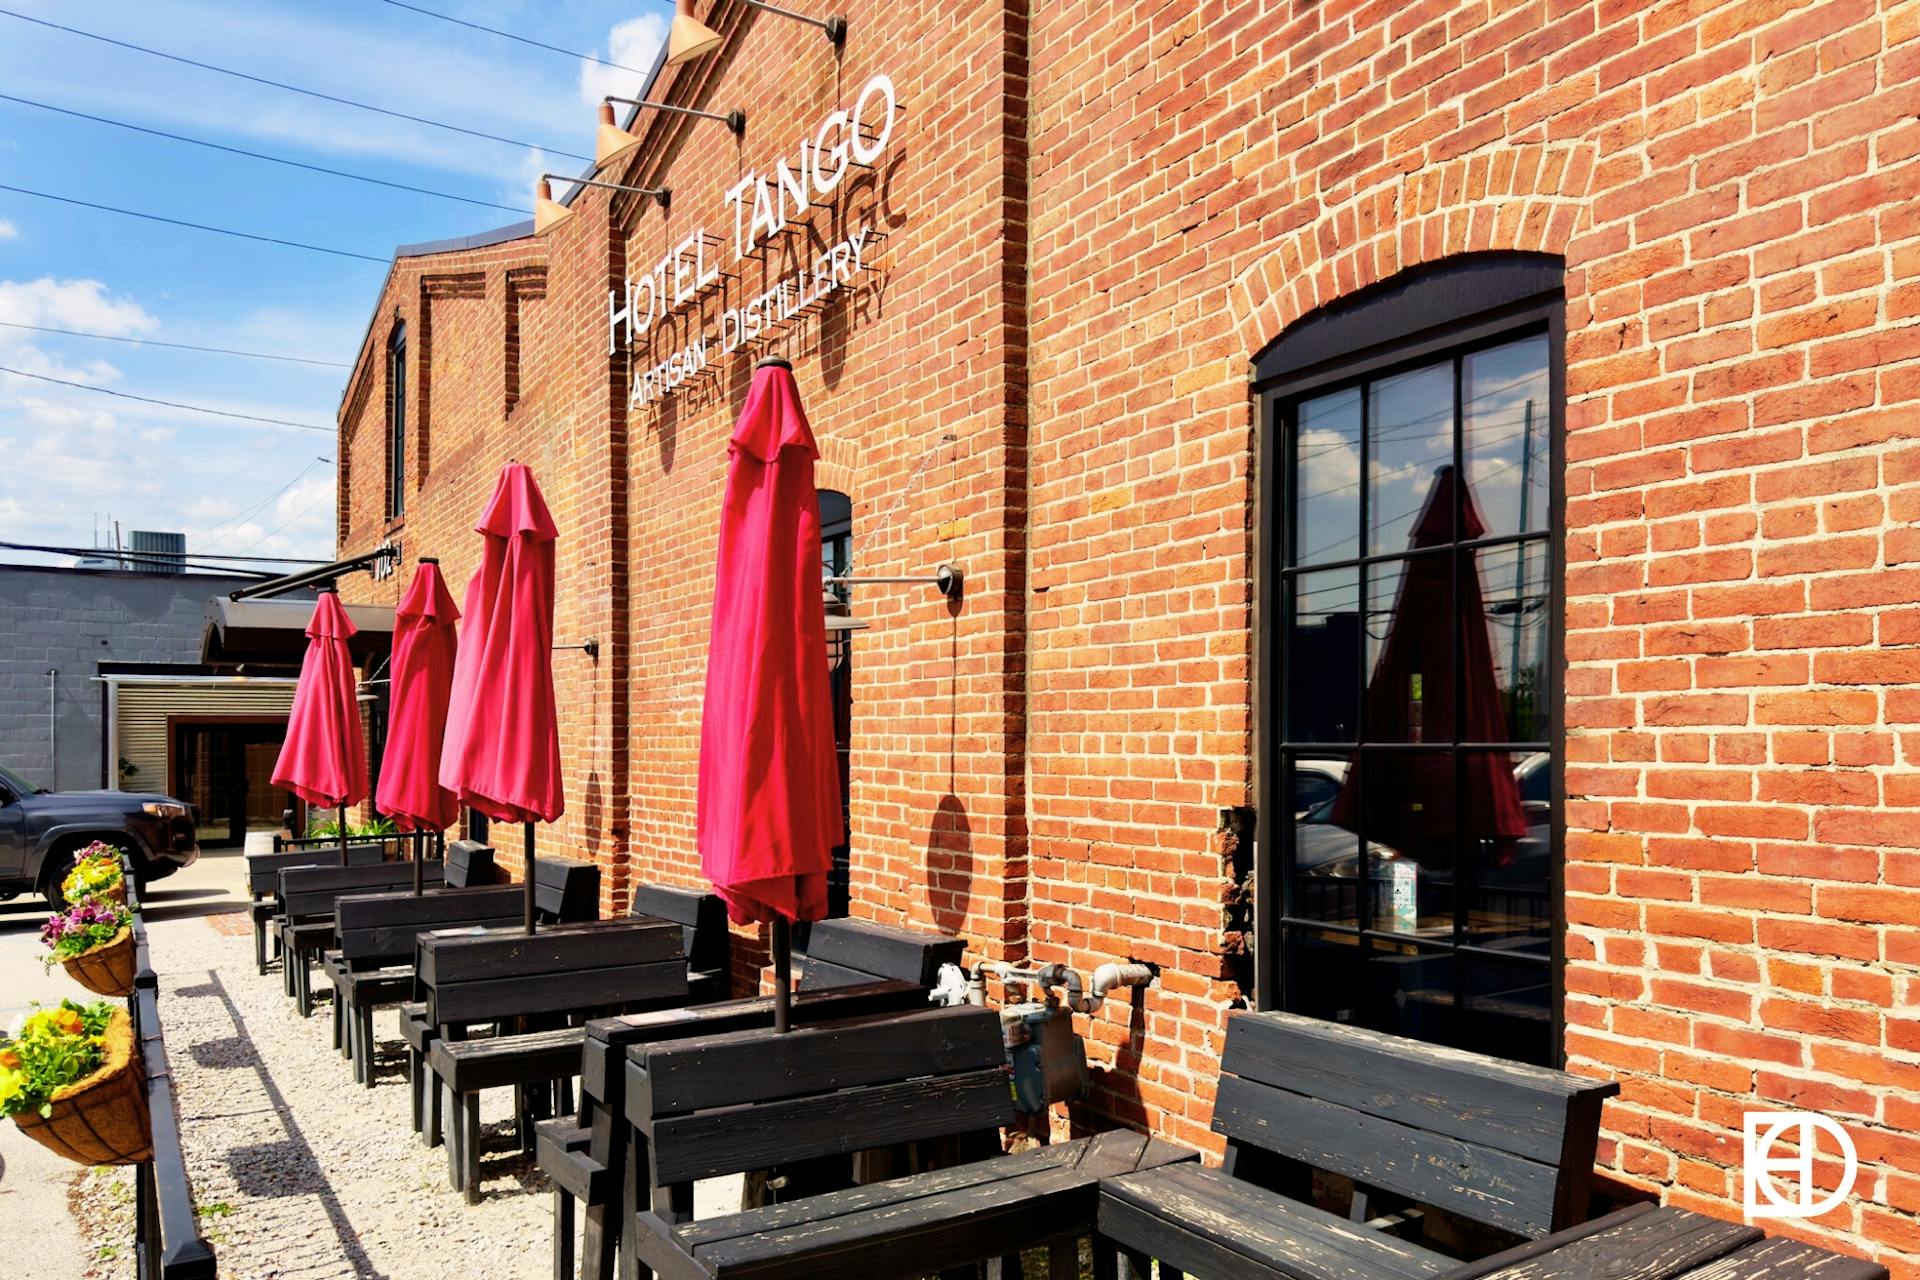 Exterior photo of Hotel Tango Distillery, showing outdoor seating